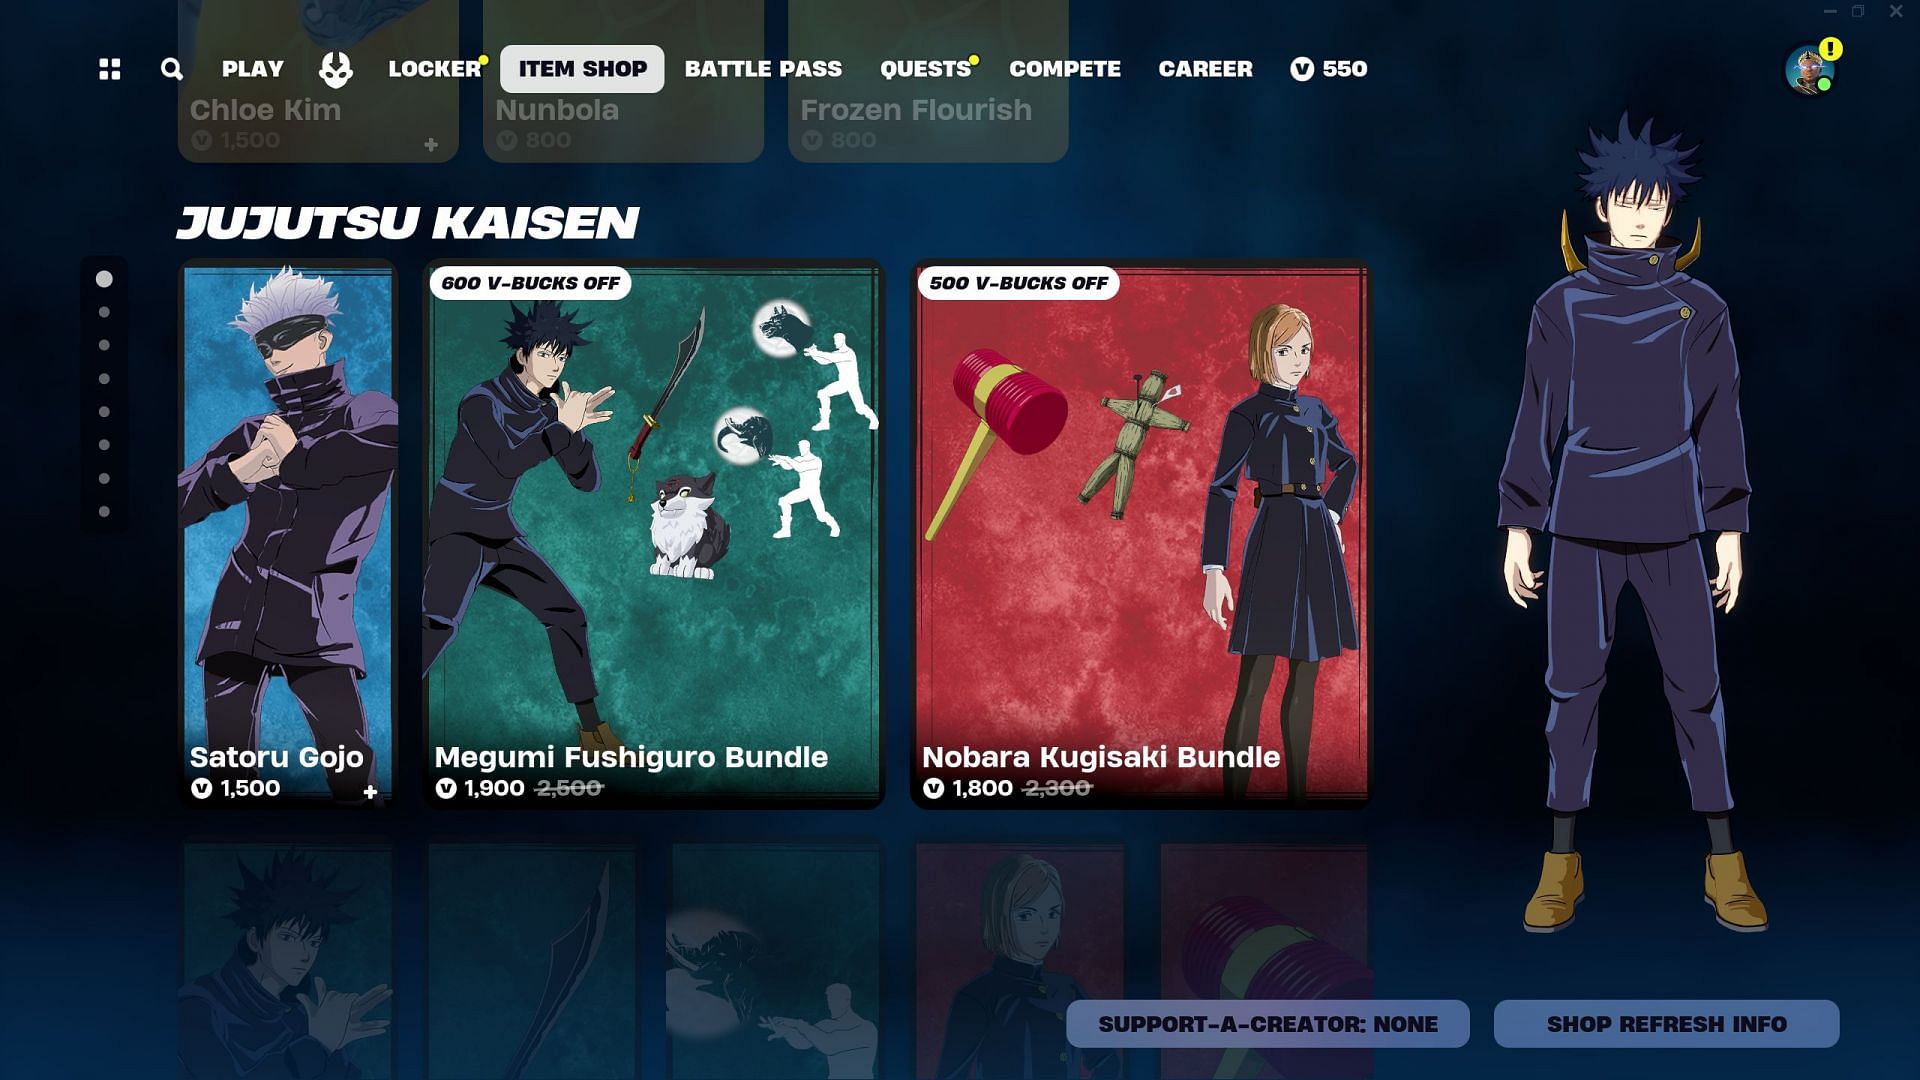 Jujutsu Kaisen skins are currently listed in the Item Shop (Image via Epic Games/Fortnite)